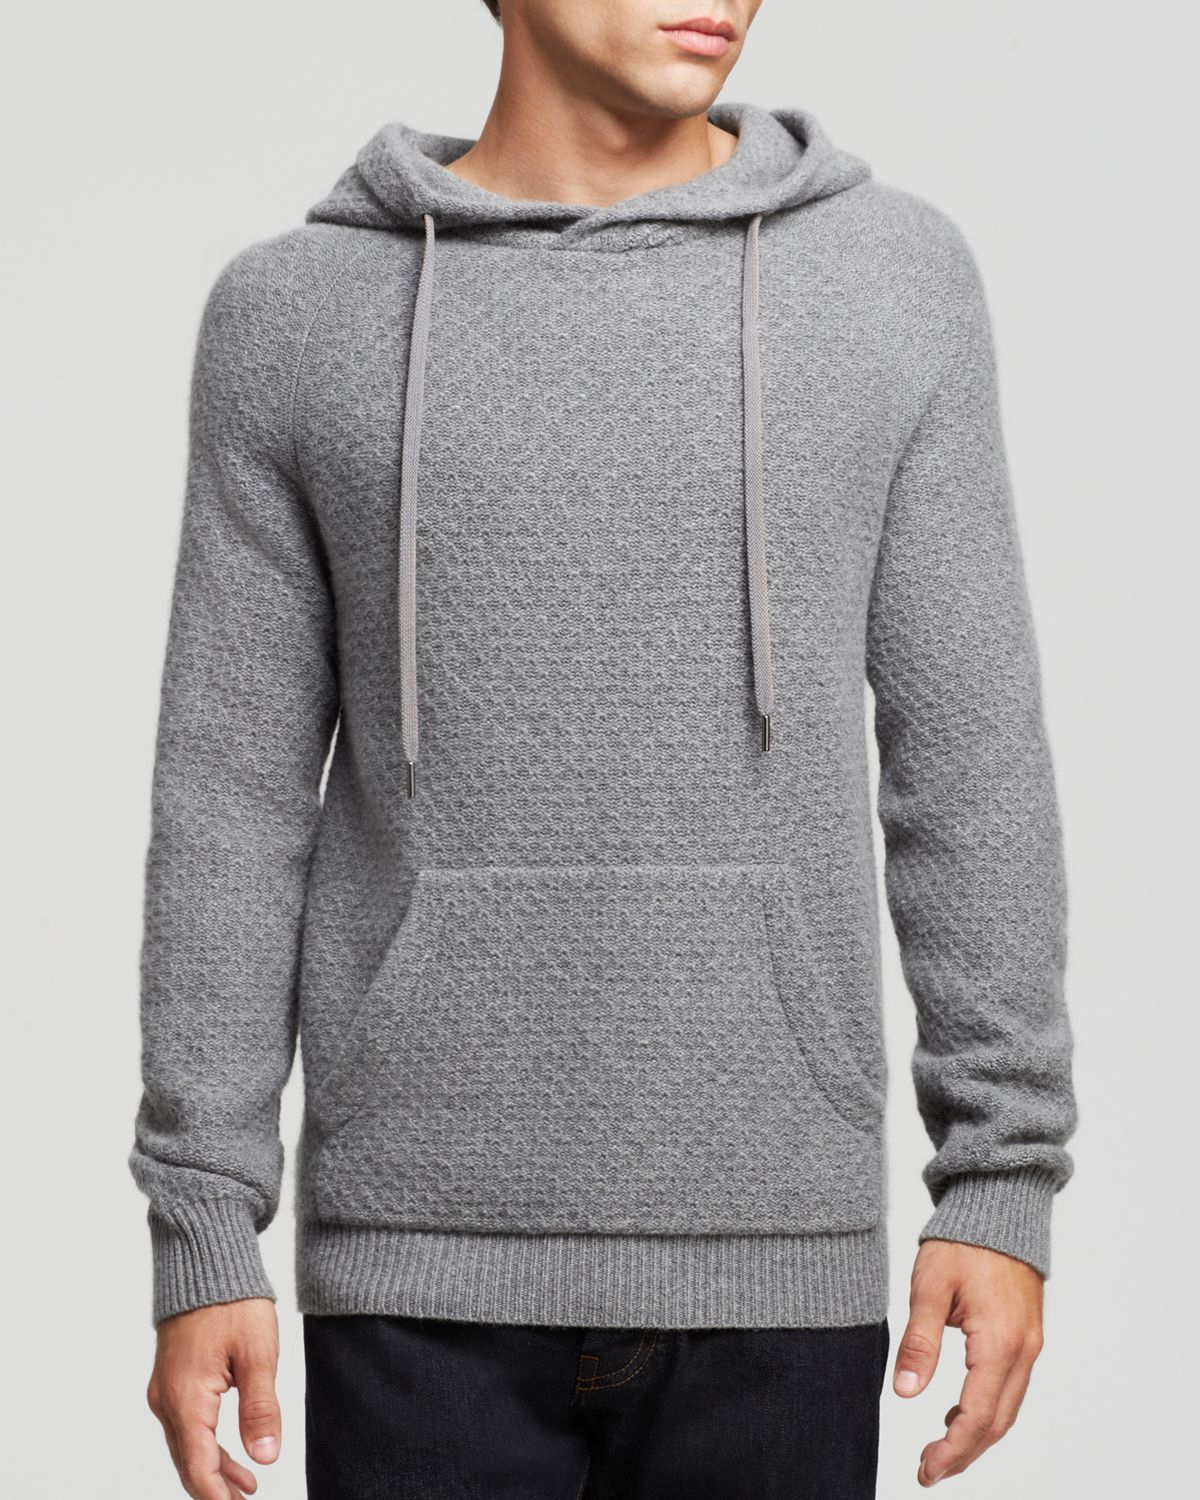 Marc By Marc Jacobs Honeycomb Cashmere Hoodie in Mid Grey Melange 